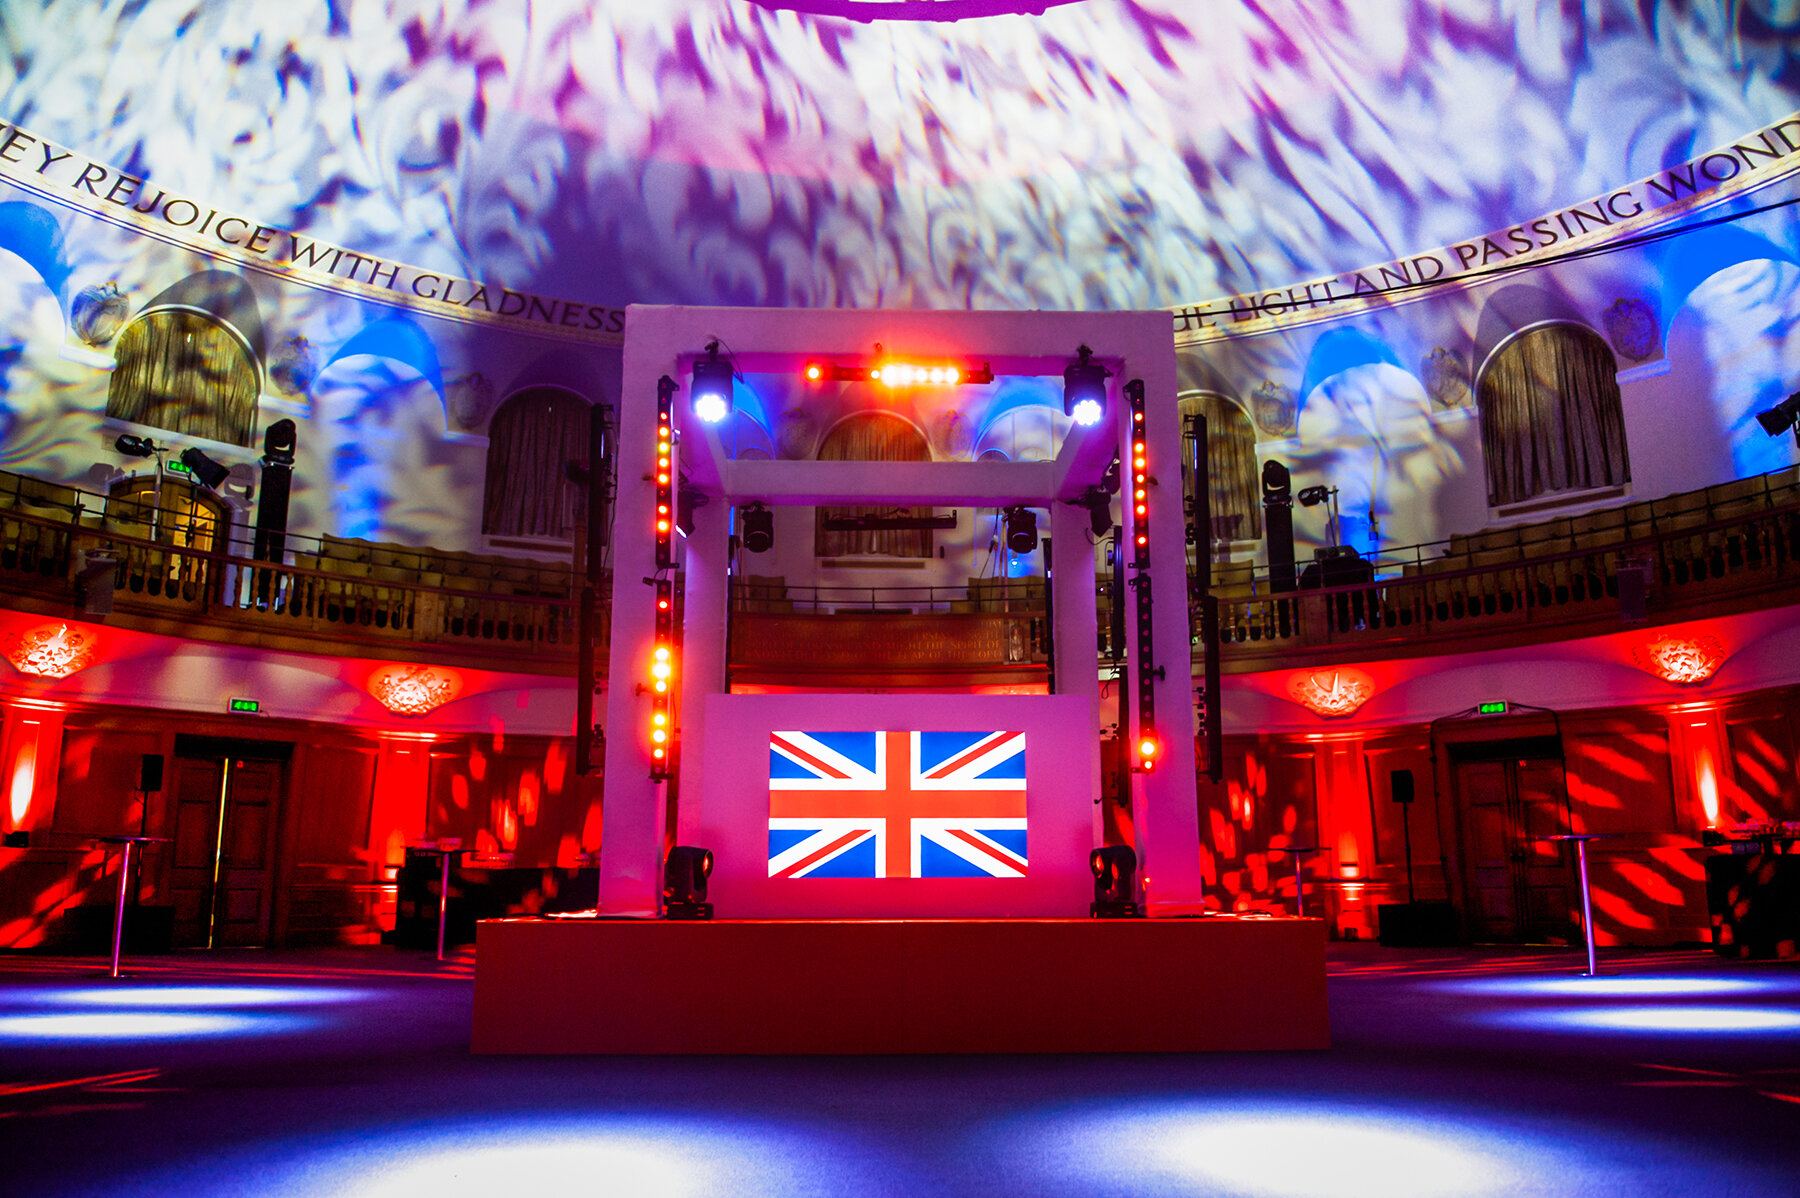 reveries-event-production-corporate-party-lighting-sound-staging-truss-rule-brittania-o.jpg